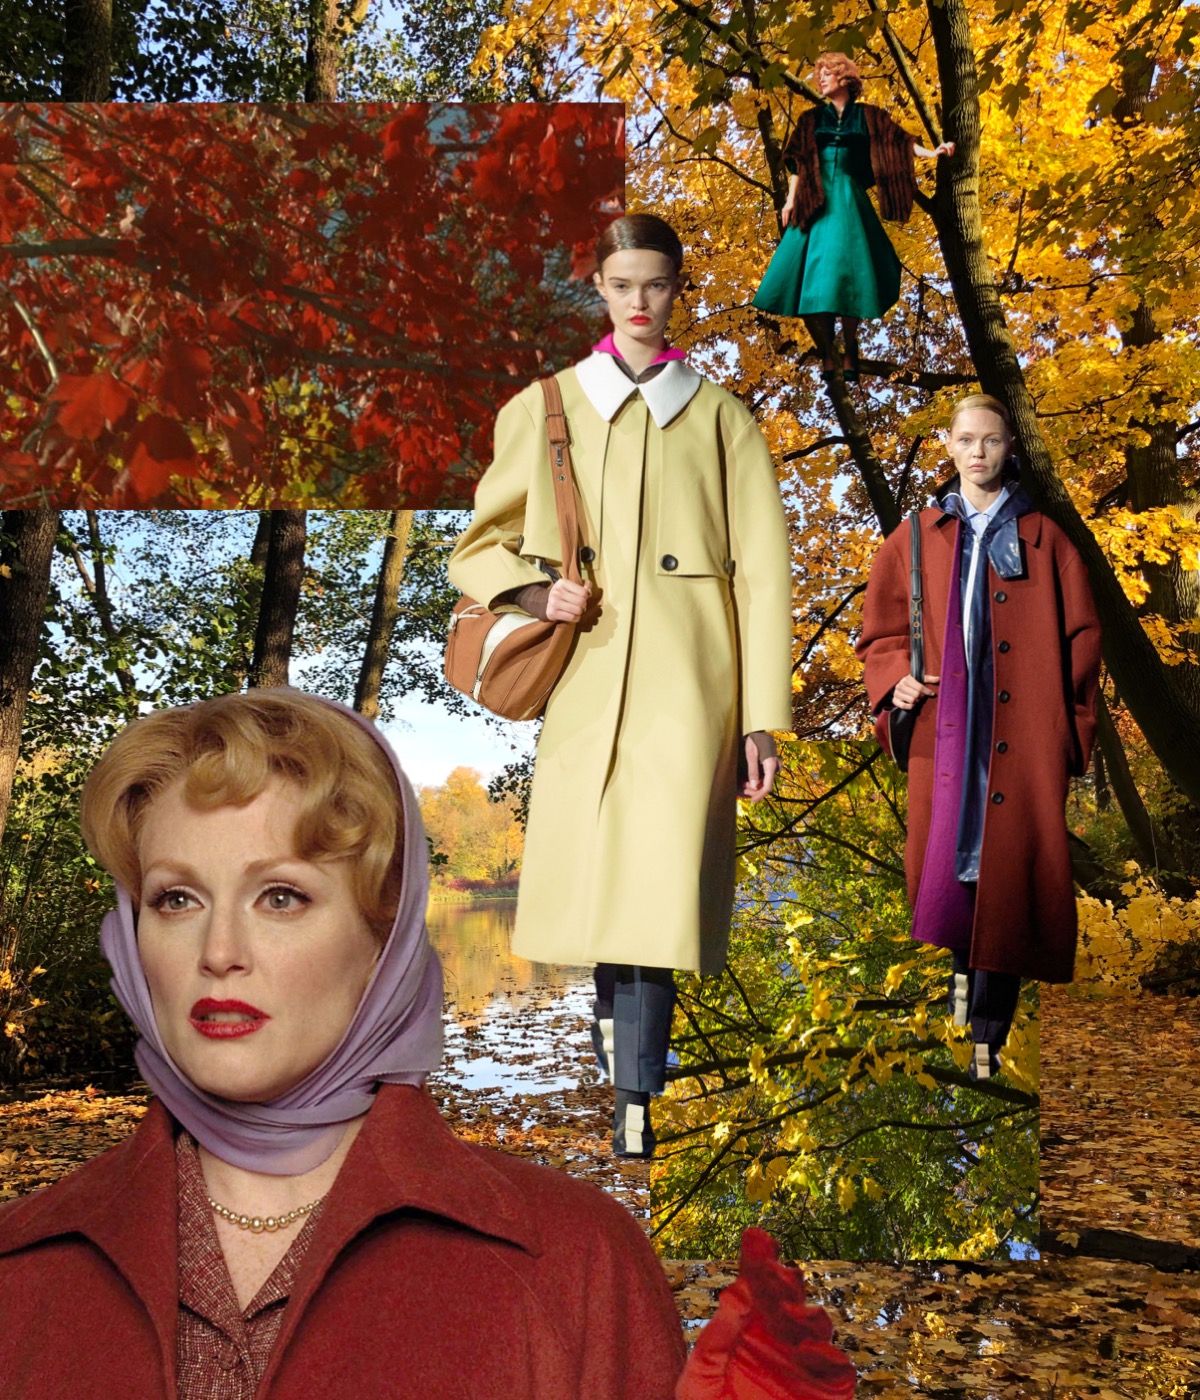 Autumnal. Tory Burch AW22 – Design & Culture by Ed